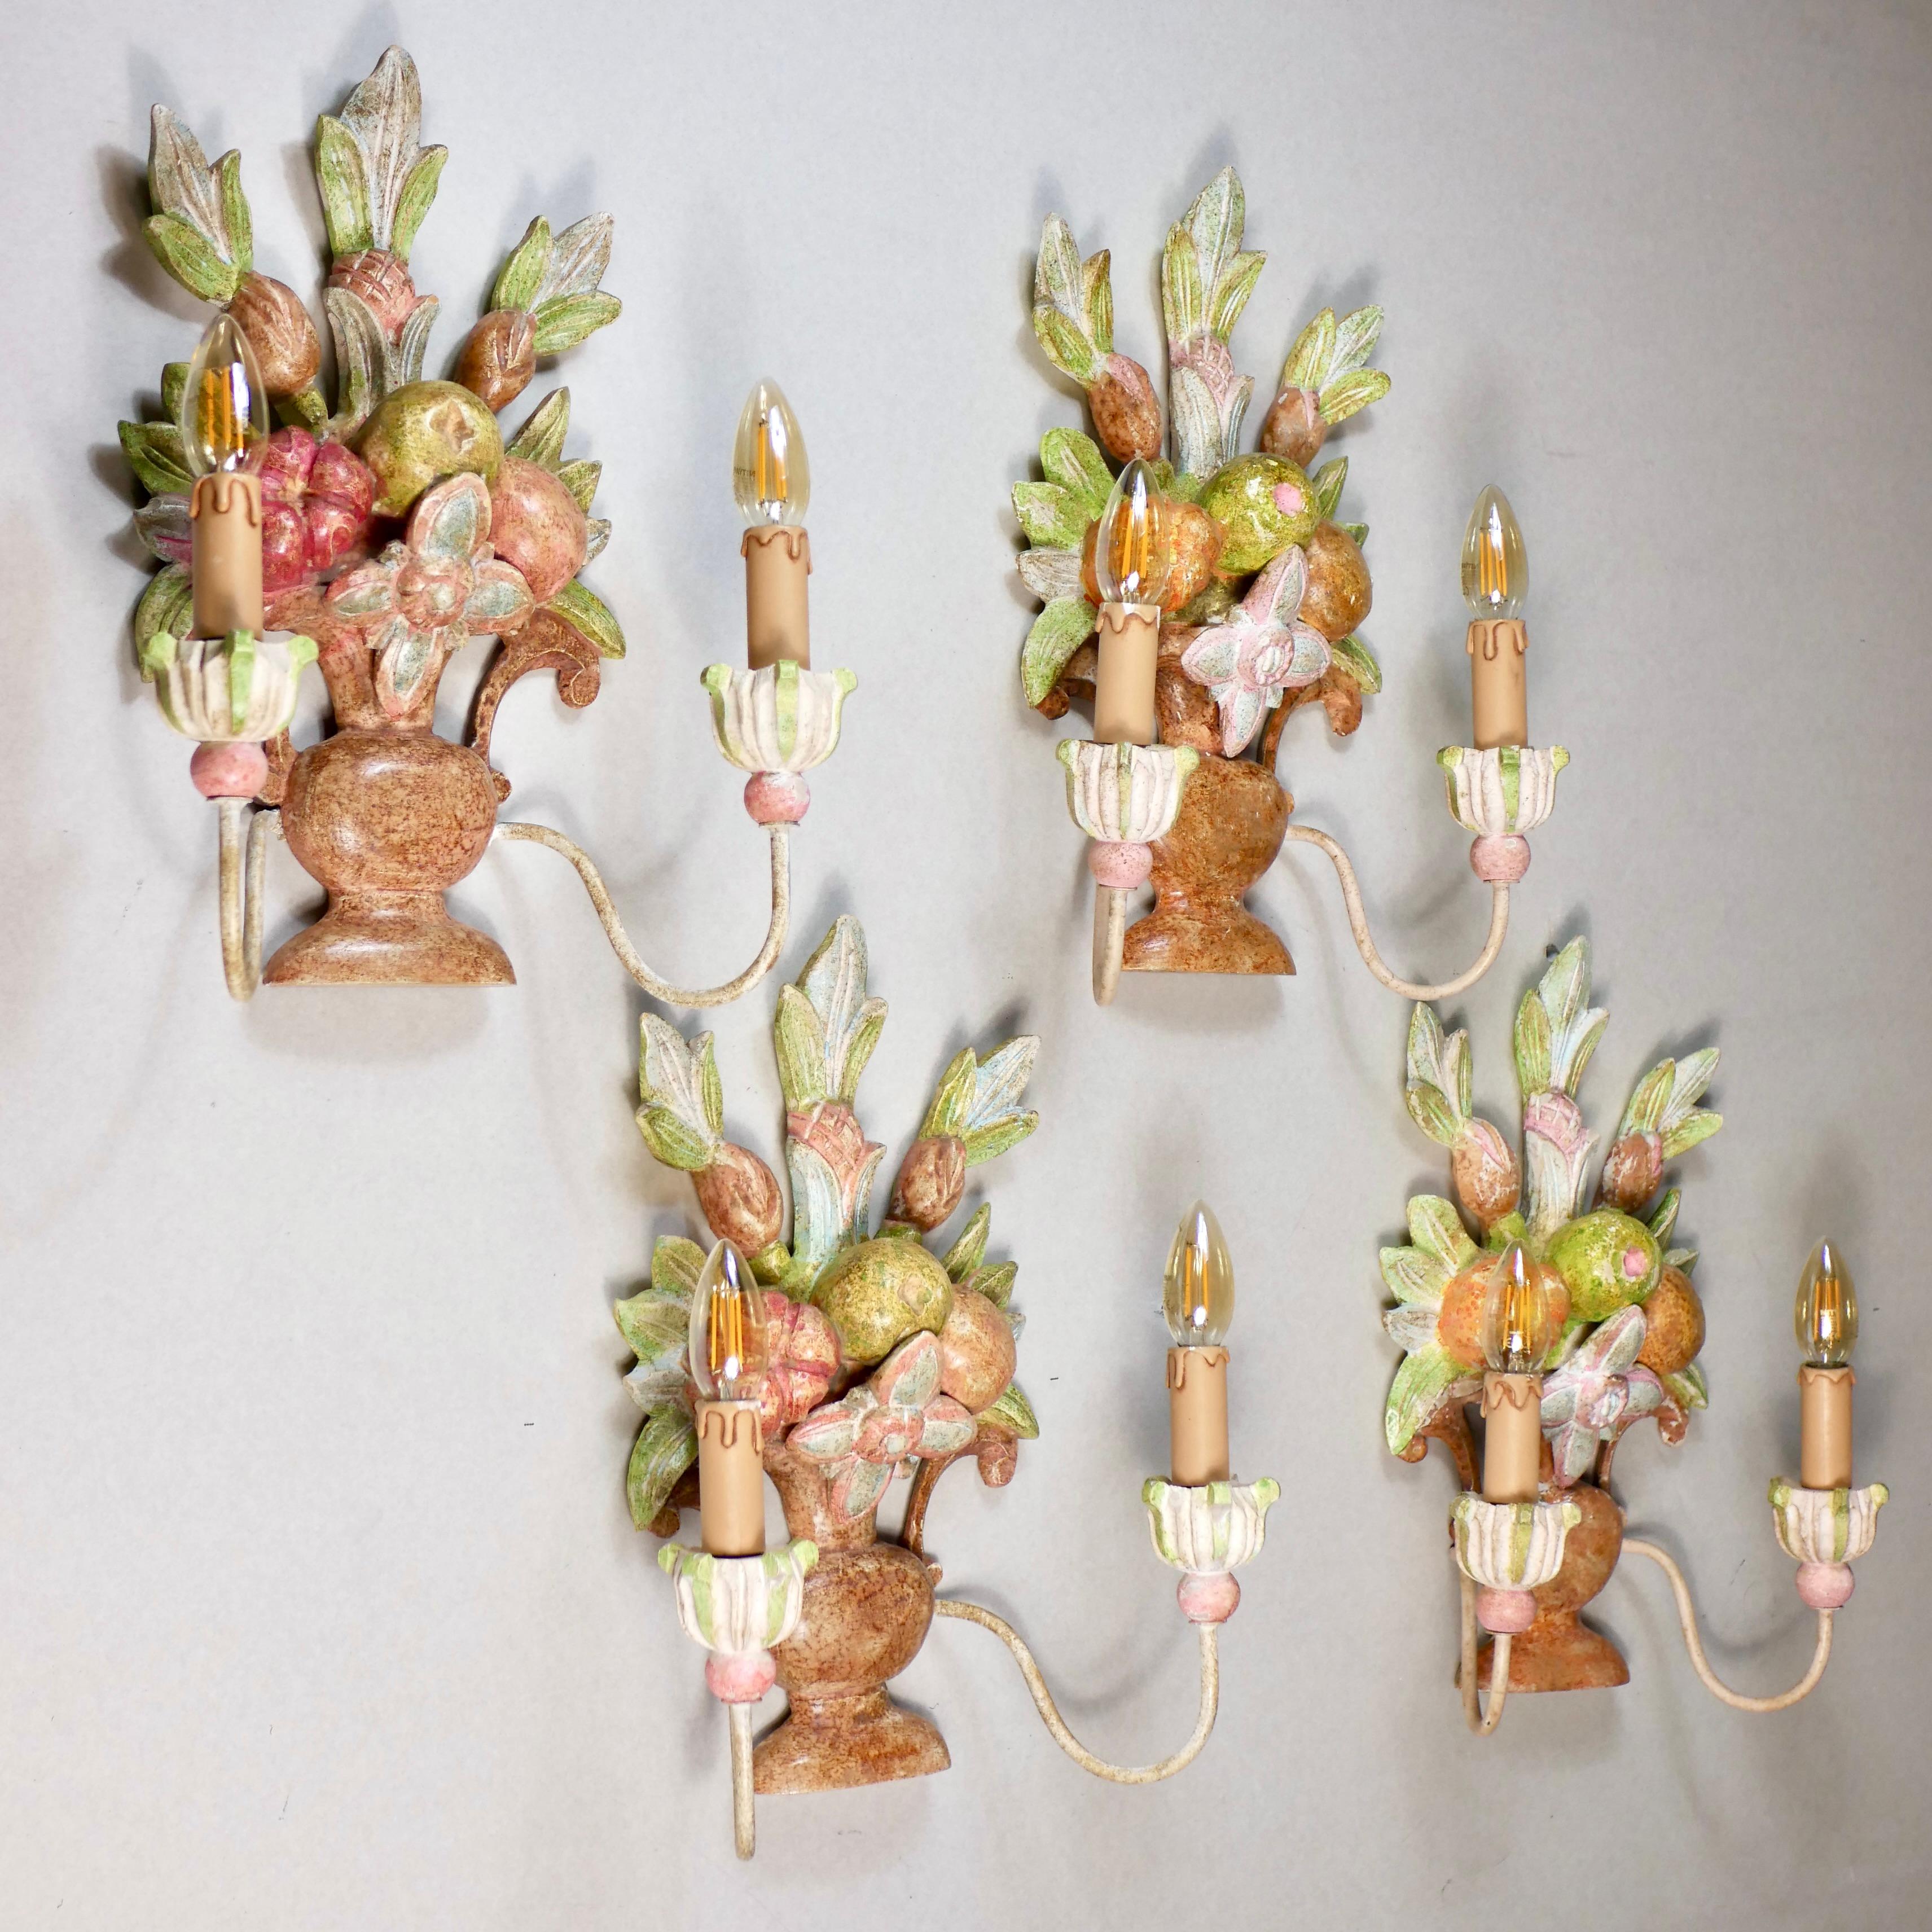 Beautiful set of 4 hand-carved wood sconces made in Italy in the early 20th century, depicting bunches / baskets of flowers, leaves and fruits, in the style of Maison Jansen.
Hand-painted, each sconce has two metal 